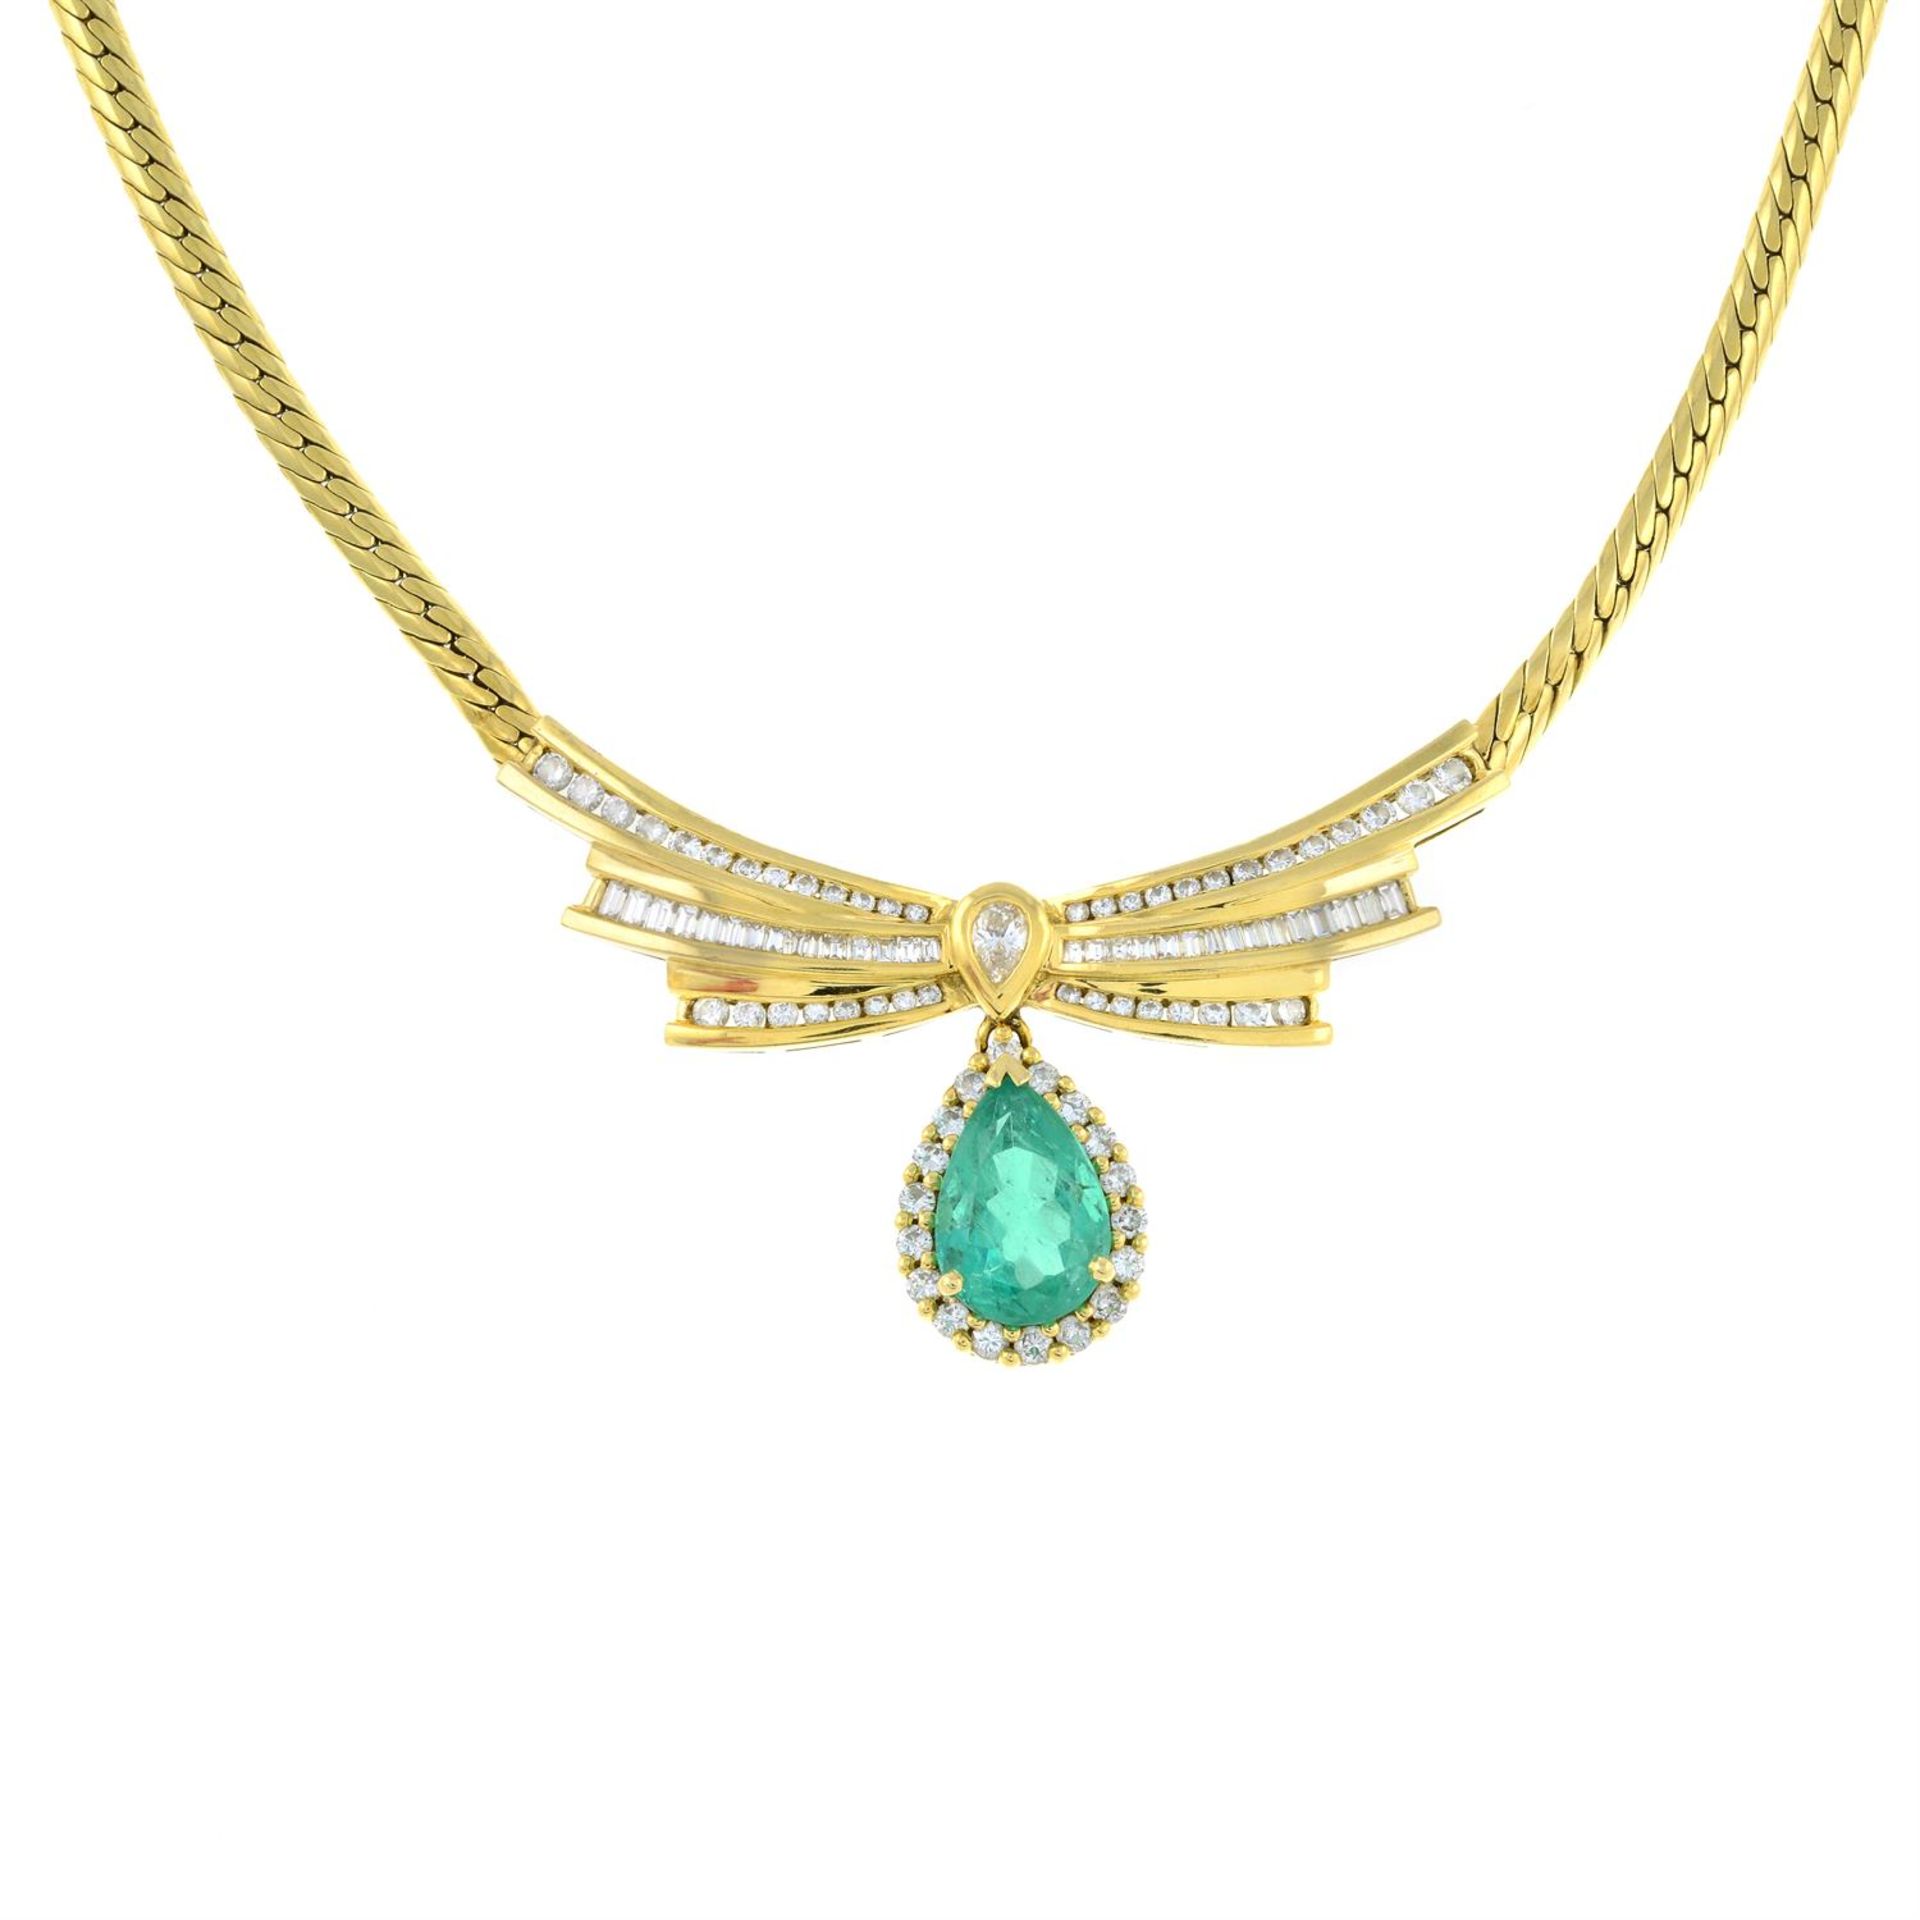 A Colombian emerald and vari-cut diamond necklace.